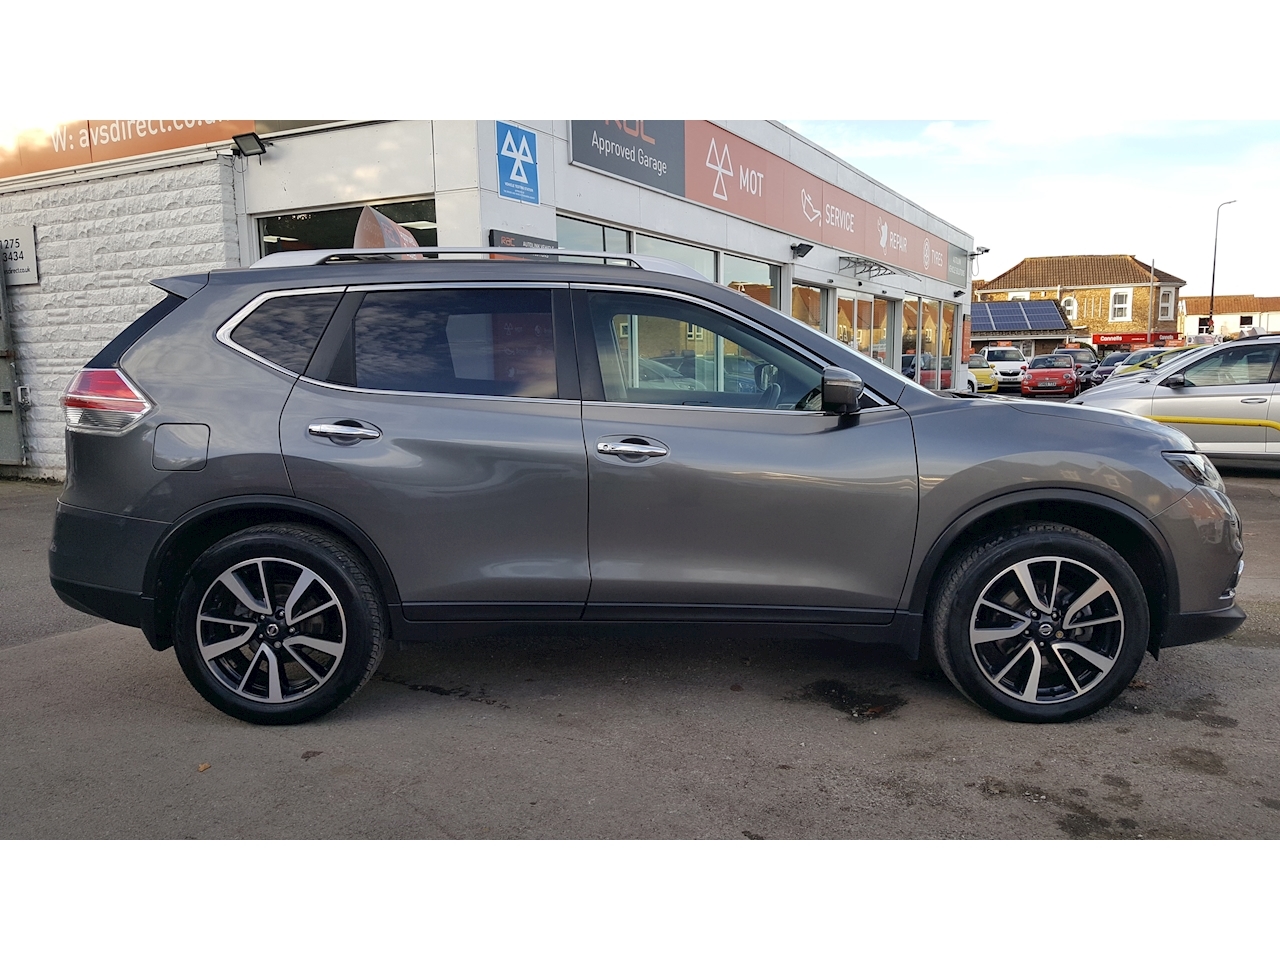 X-Trail 1.6 dCi N-Vision SUV 5dr Diesel (s/s) (130 ps)